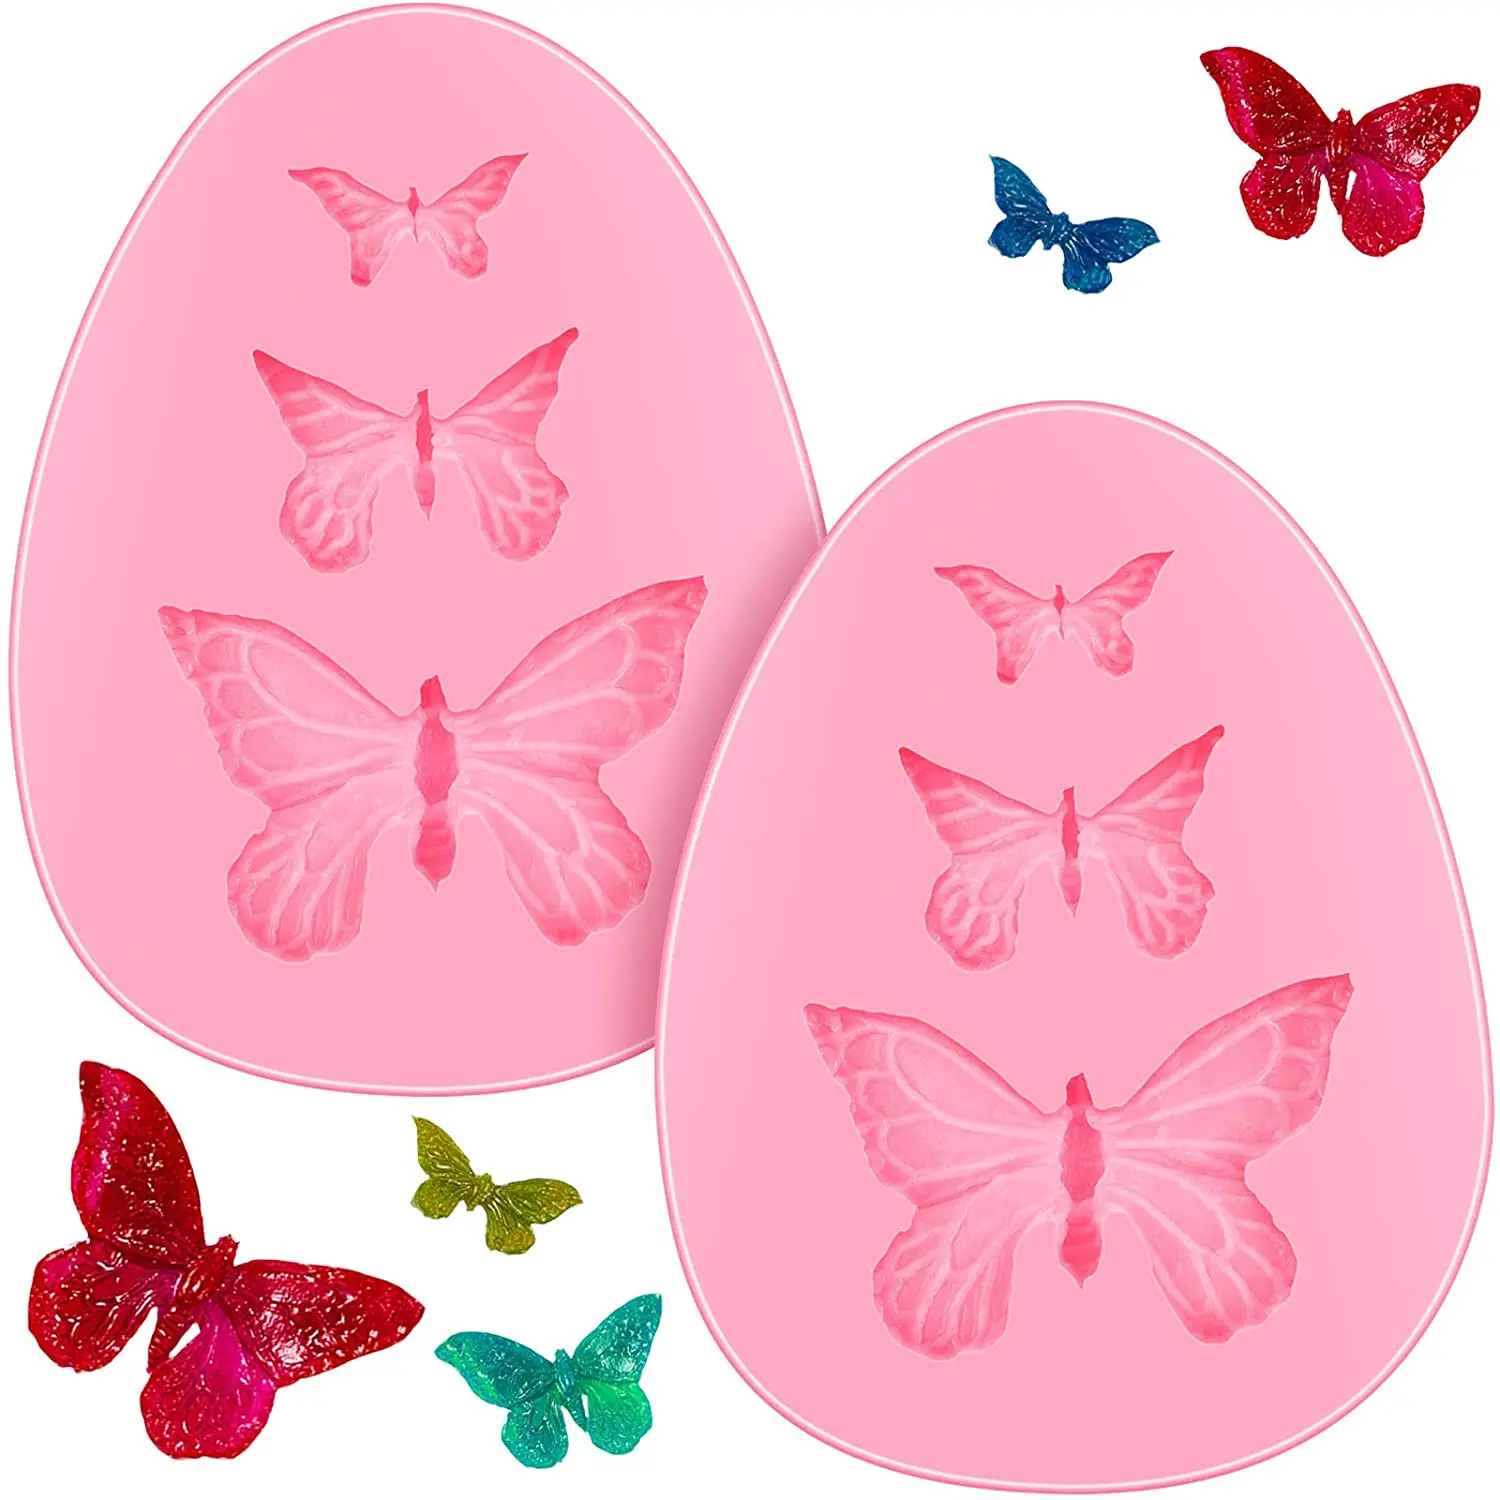 Butterfly Silicone Fondant Mold Cake Chocolate Decorating Baking Mould Tools 